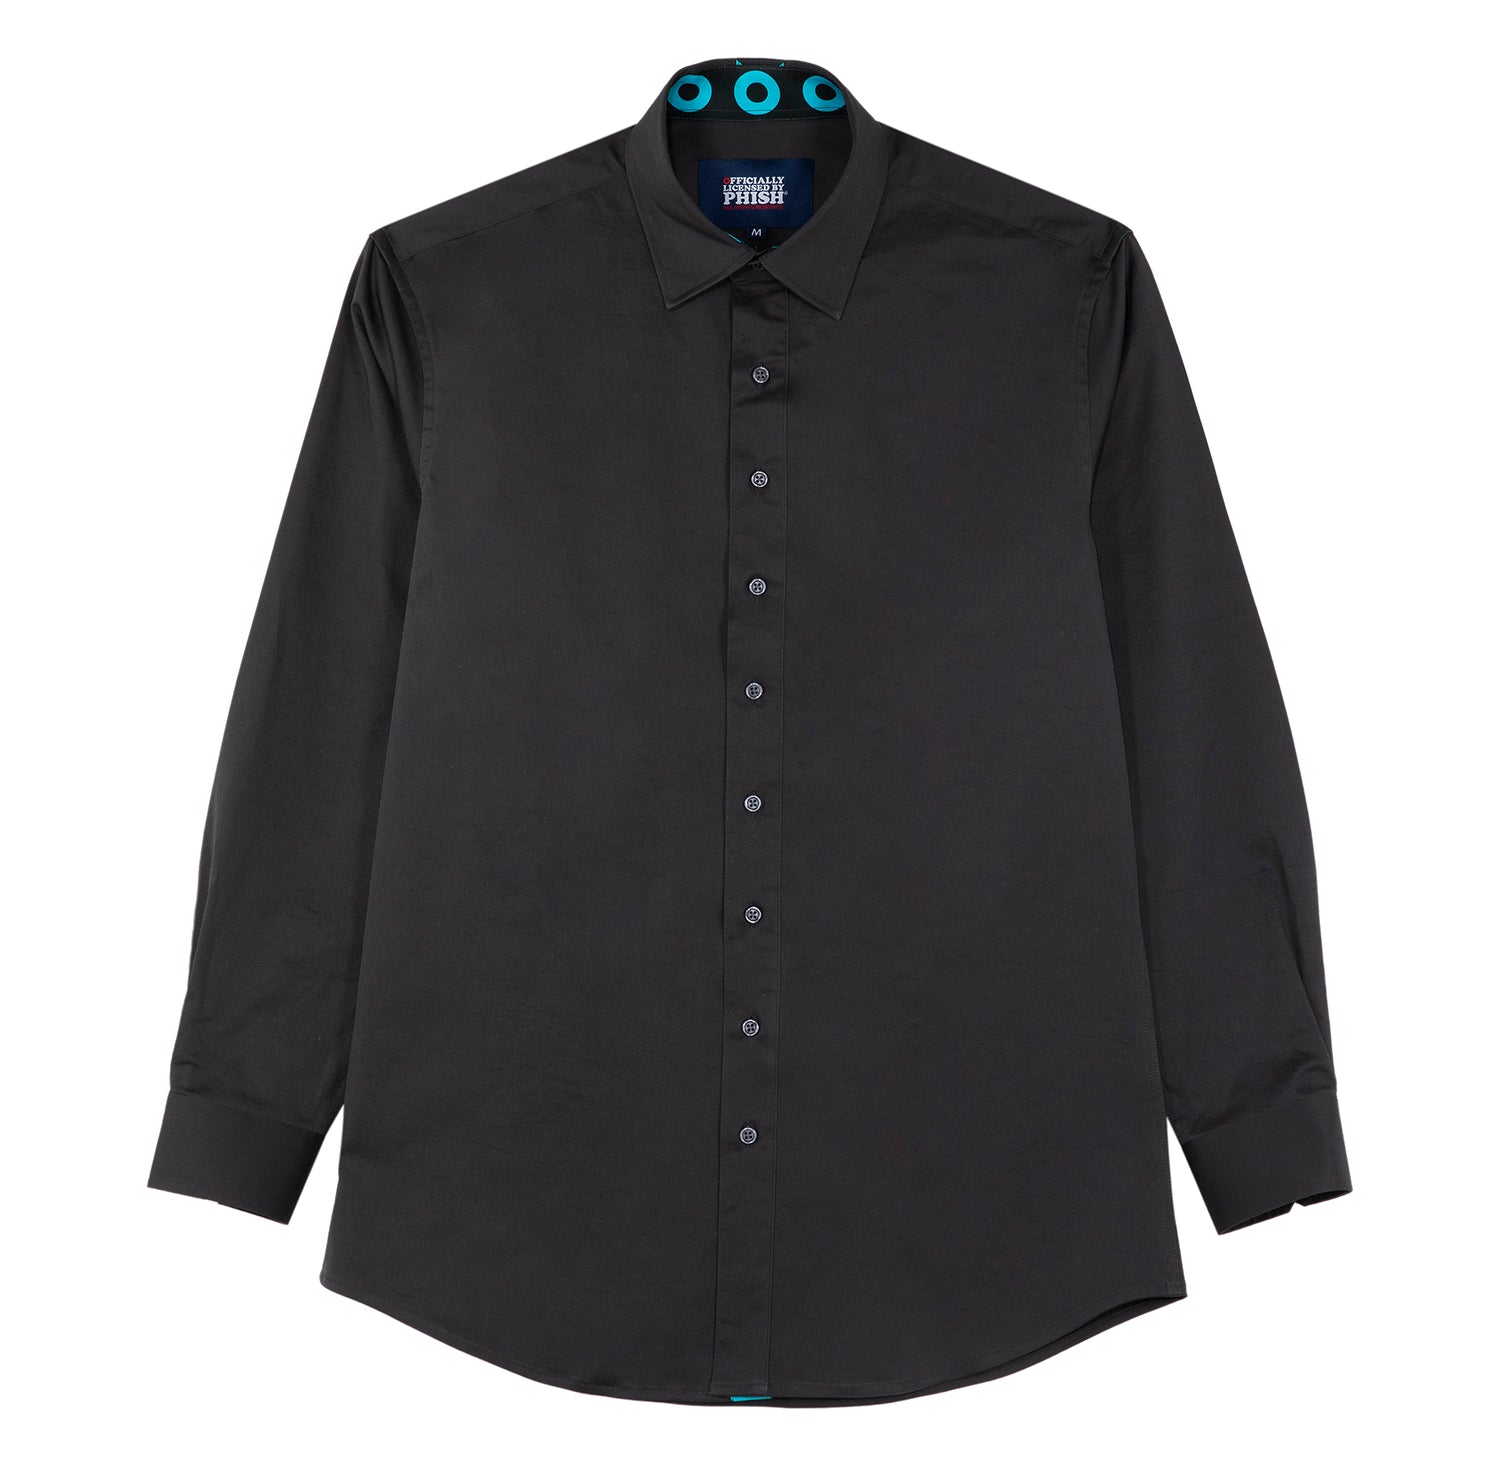 Phish Formal Long Sleeve Button Down in Charcoal - Section 119